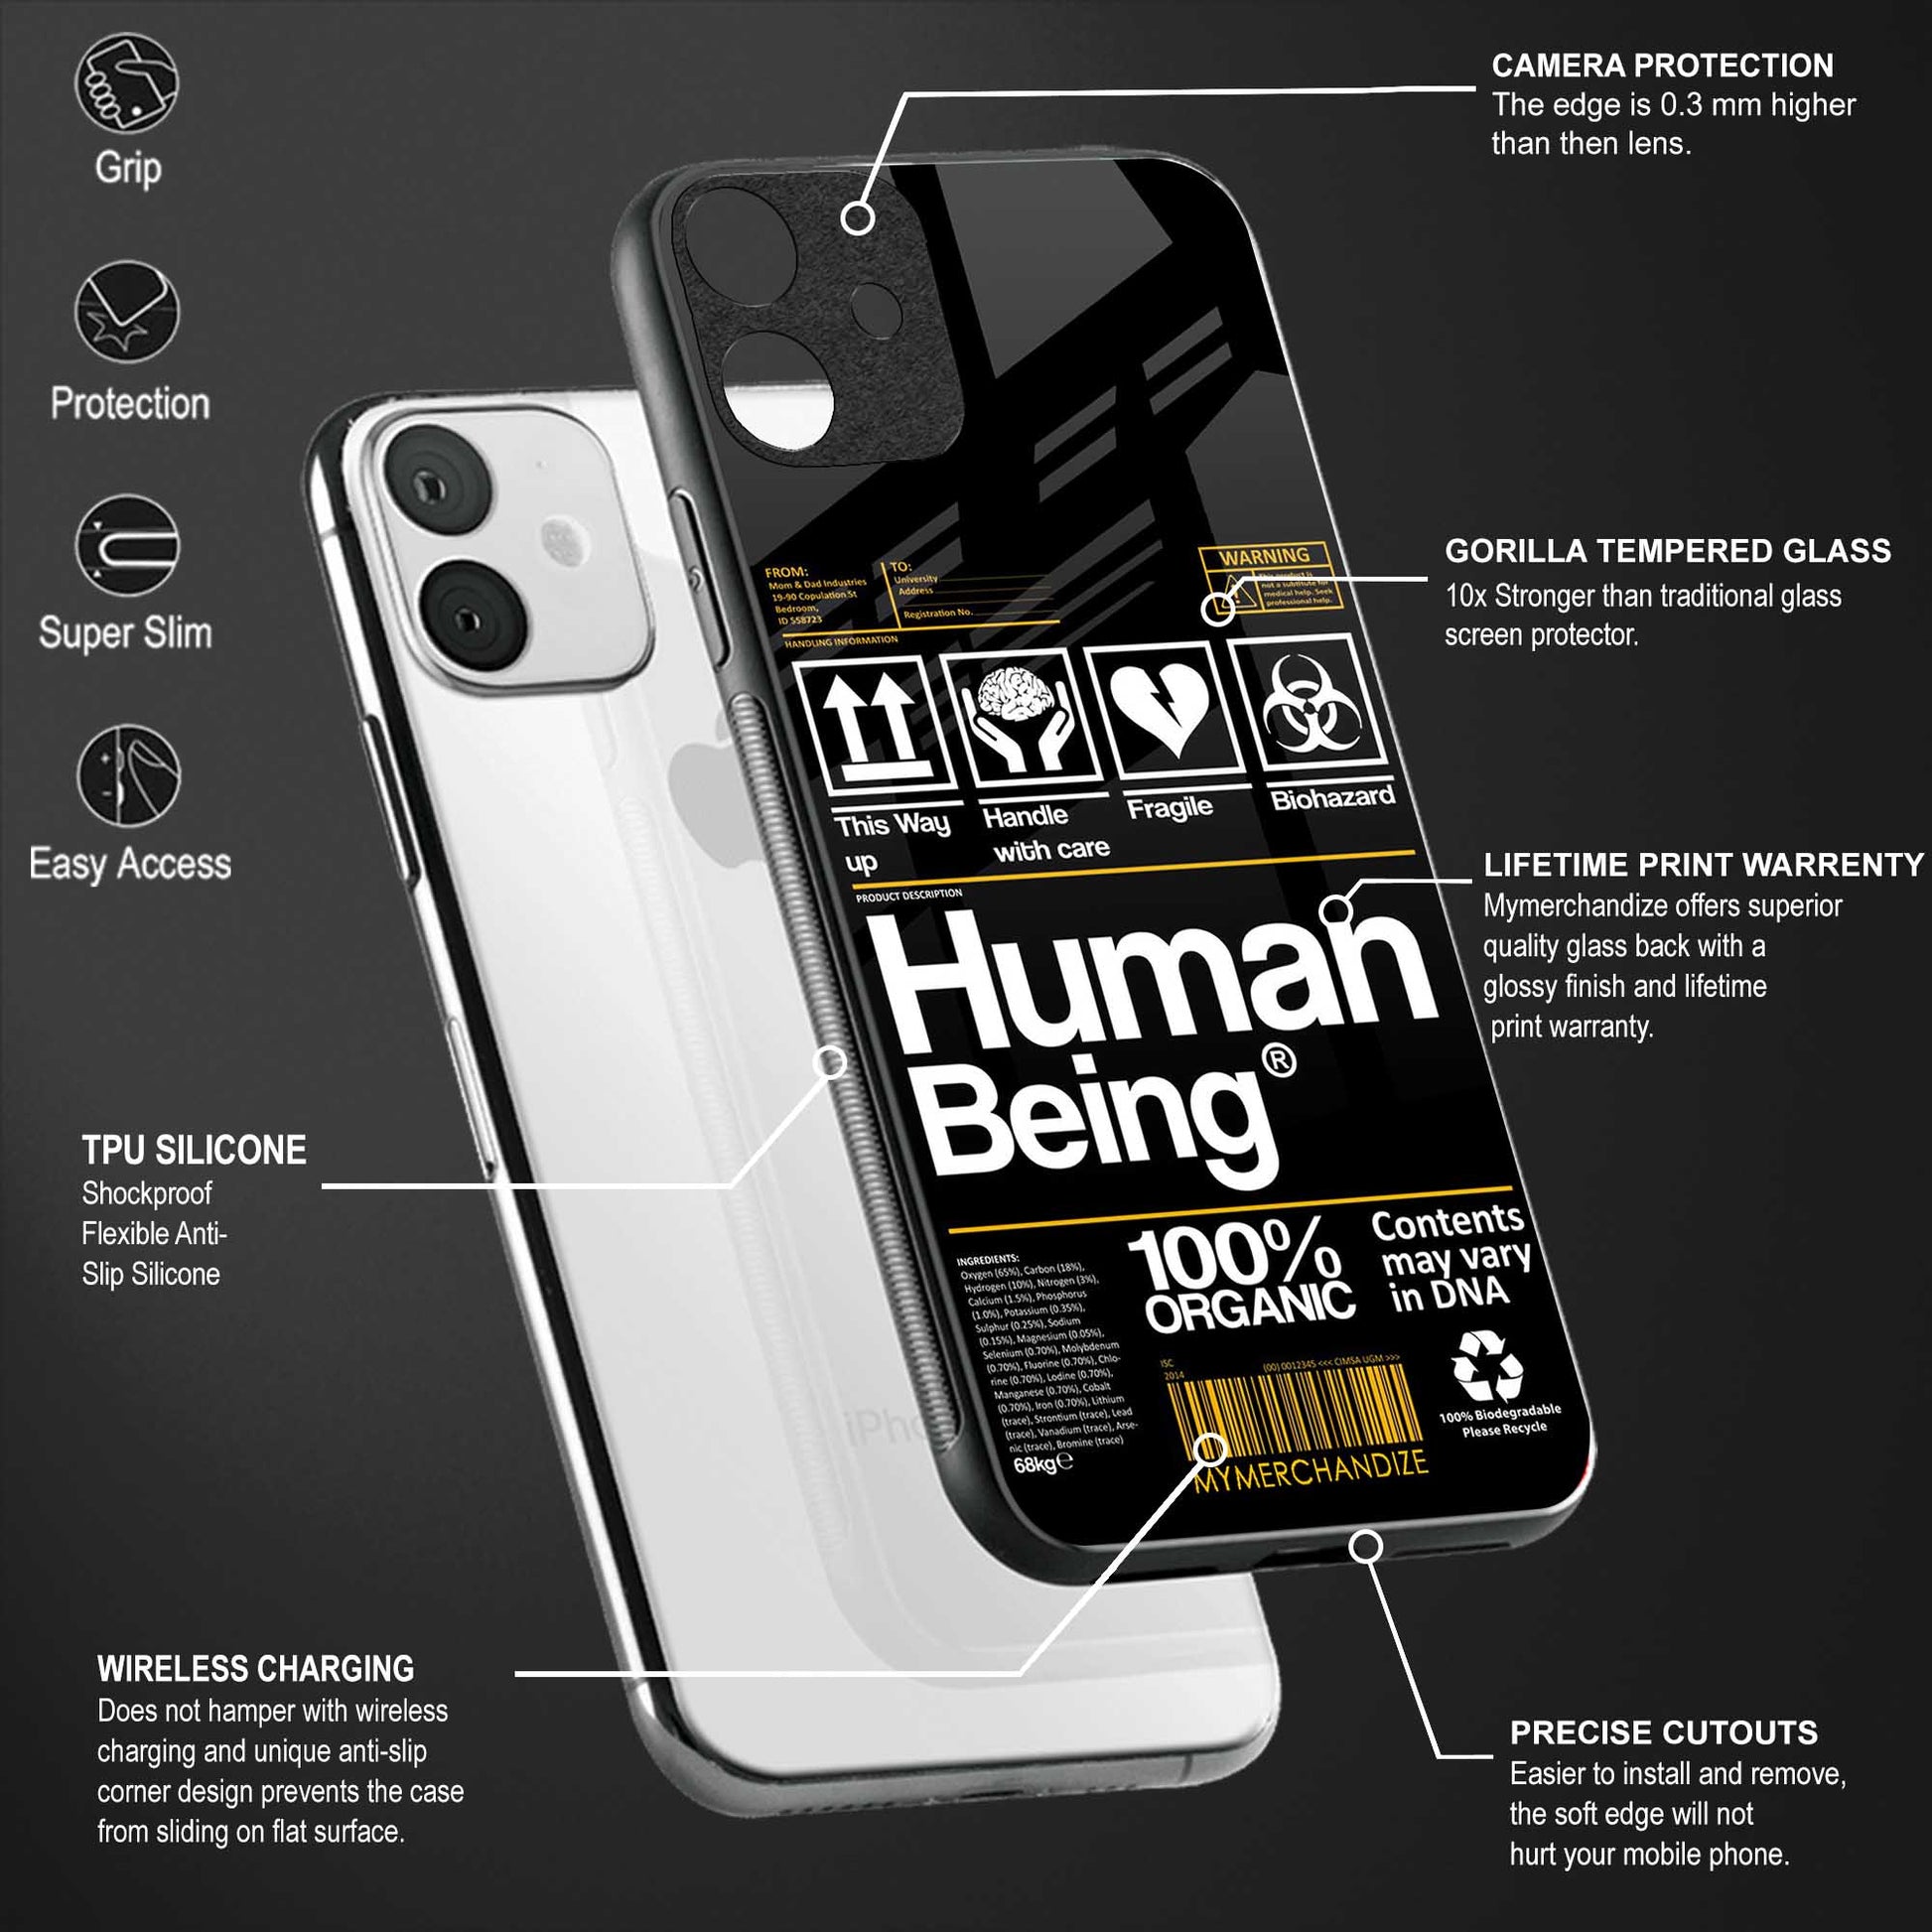 human being label phone cover for samsung galaxy a91